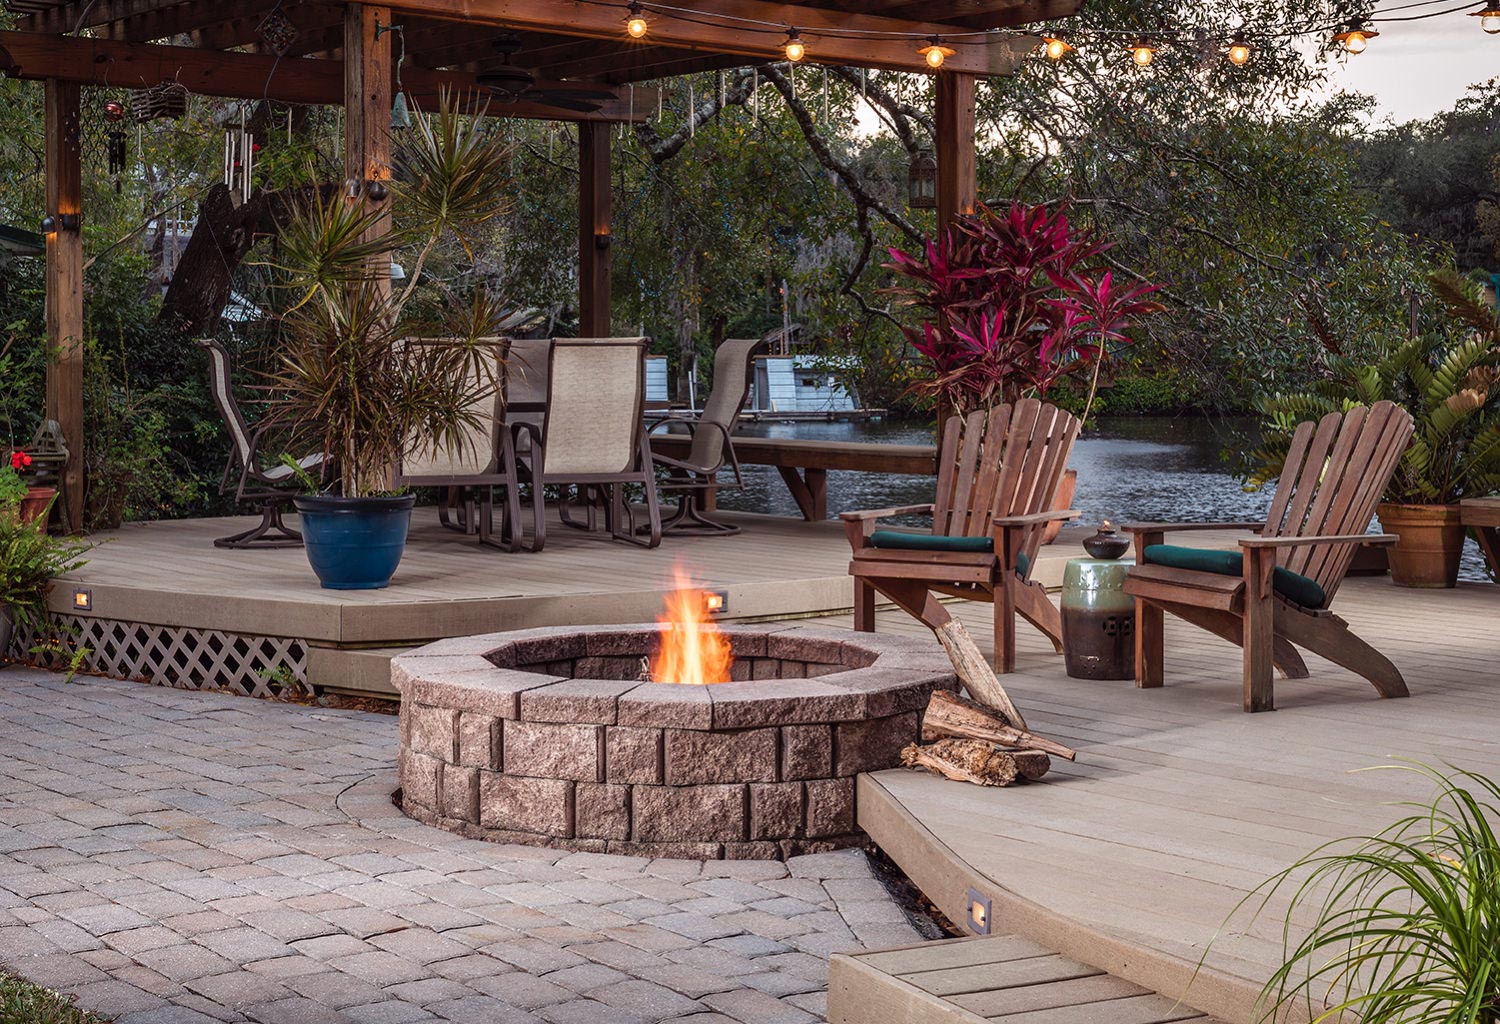 Composite deck with a pergola, fire pit, and multiple chairs.